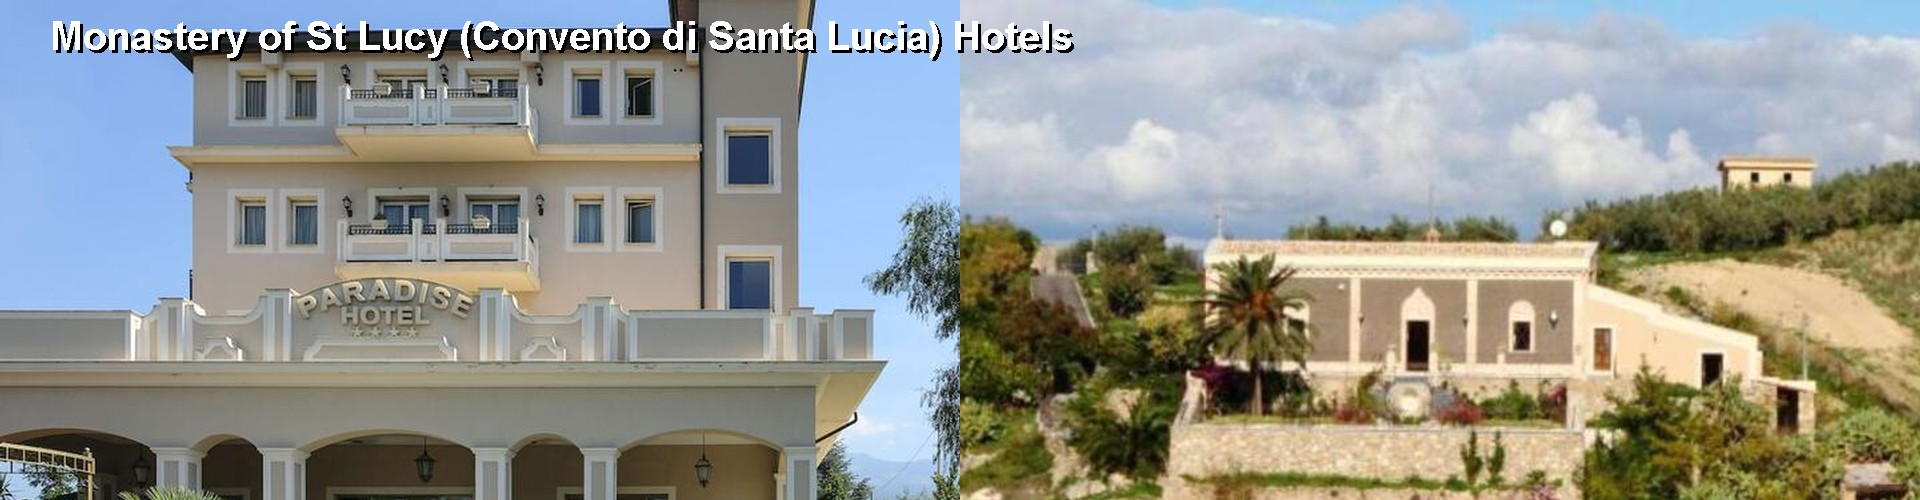 5 Best Hotels near Monastery of St Lucy (Convento di Santa Lucia)